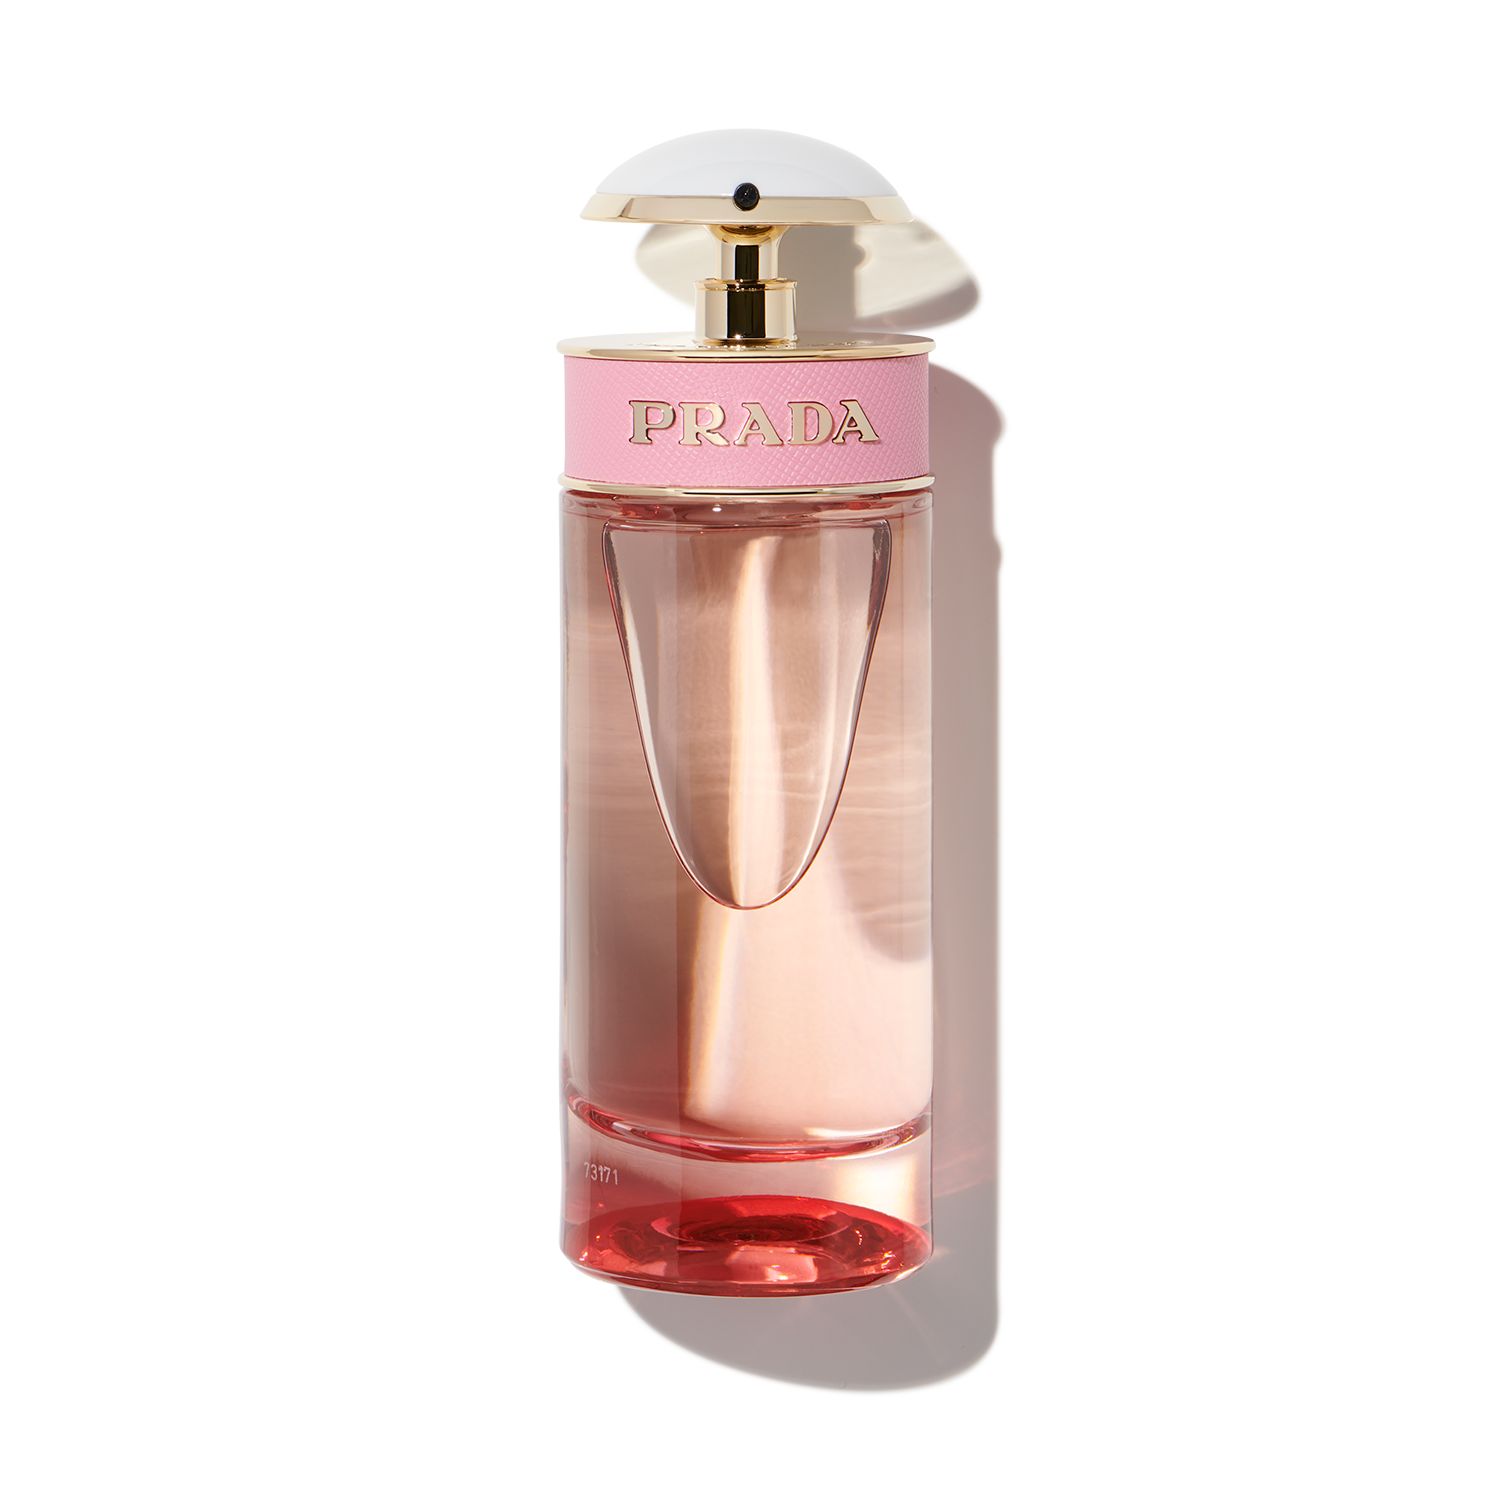 Get PRADA Candy Florale at Scentbird for $16.95